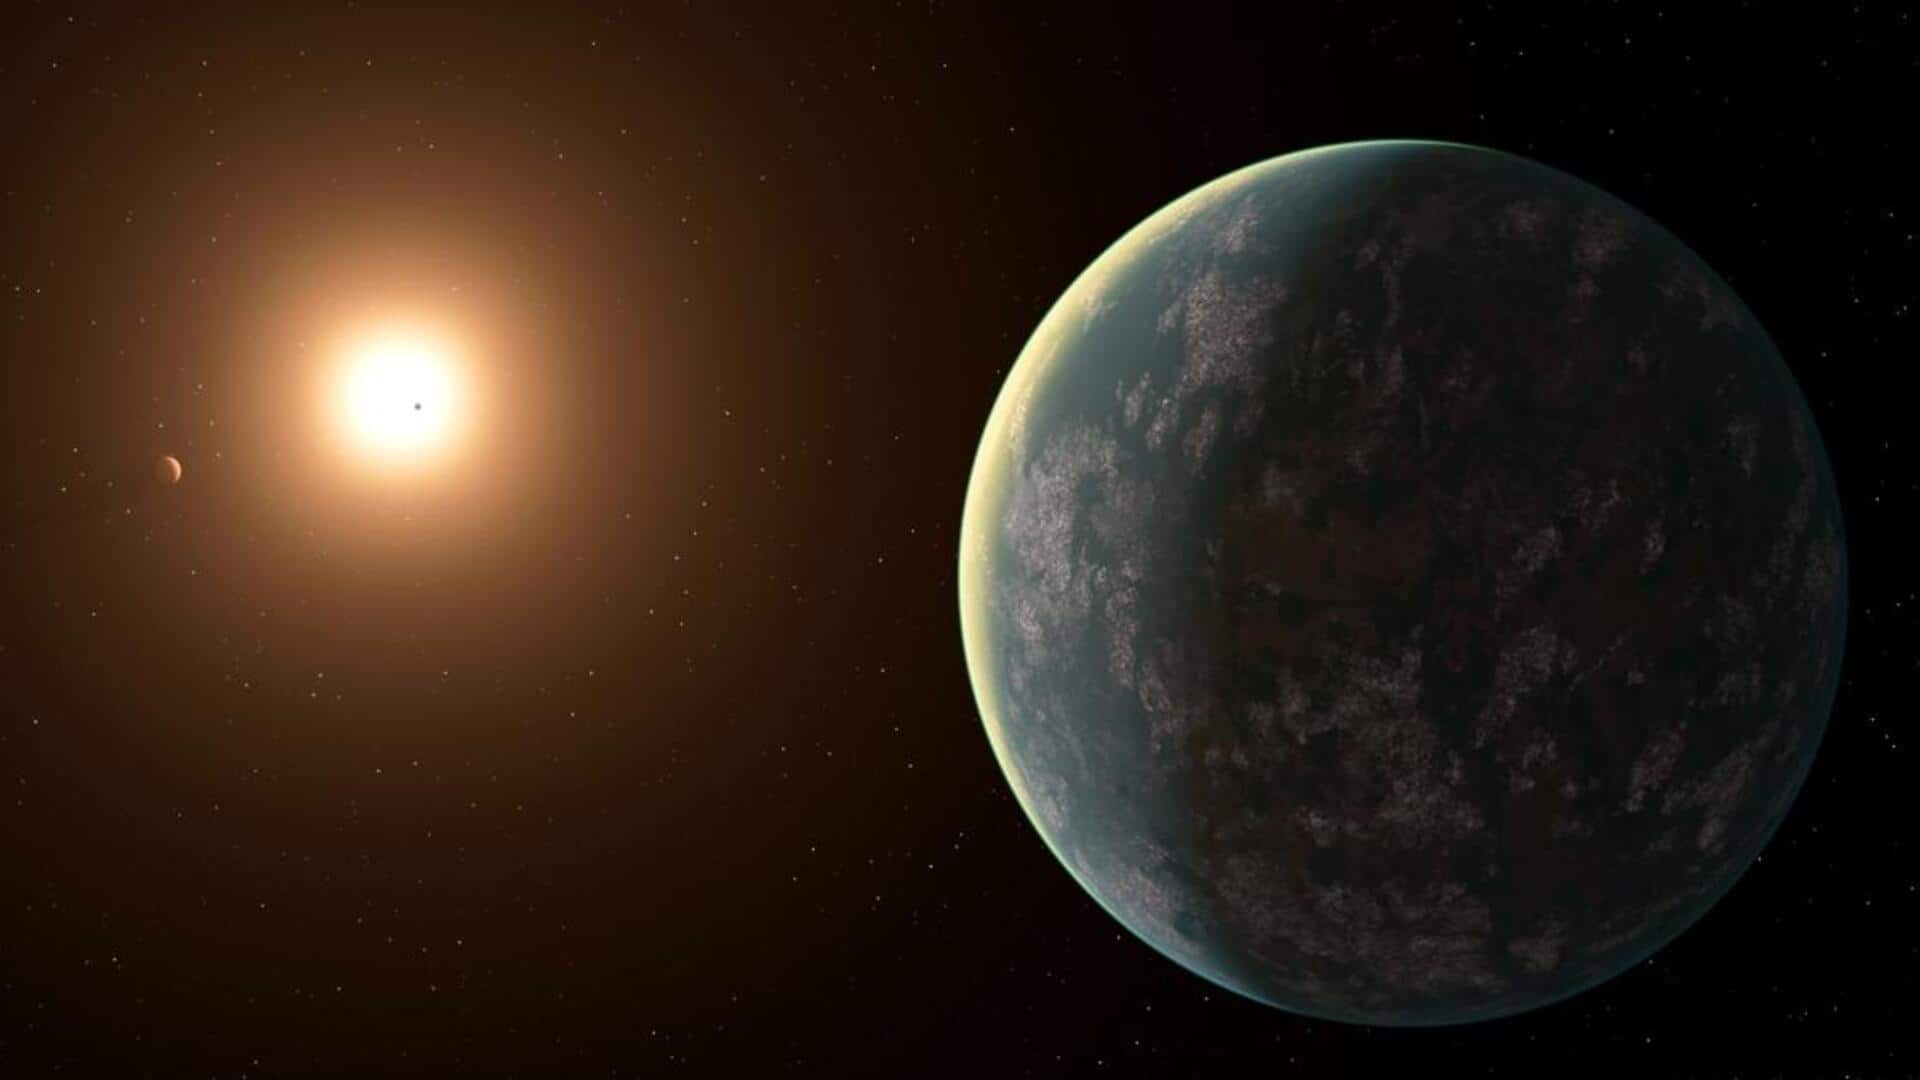 Astronomers spot intriguing super-Earth in dwarf star's habitable zone